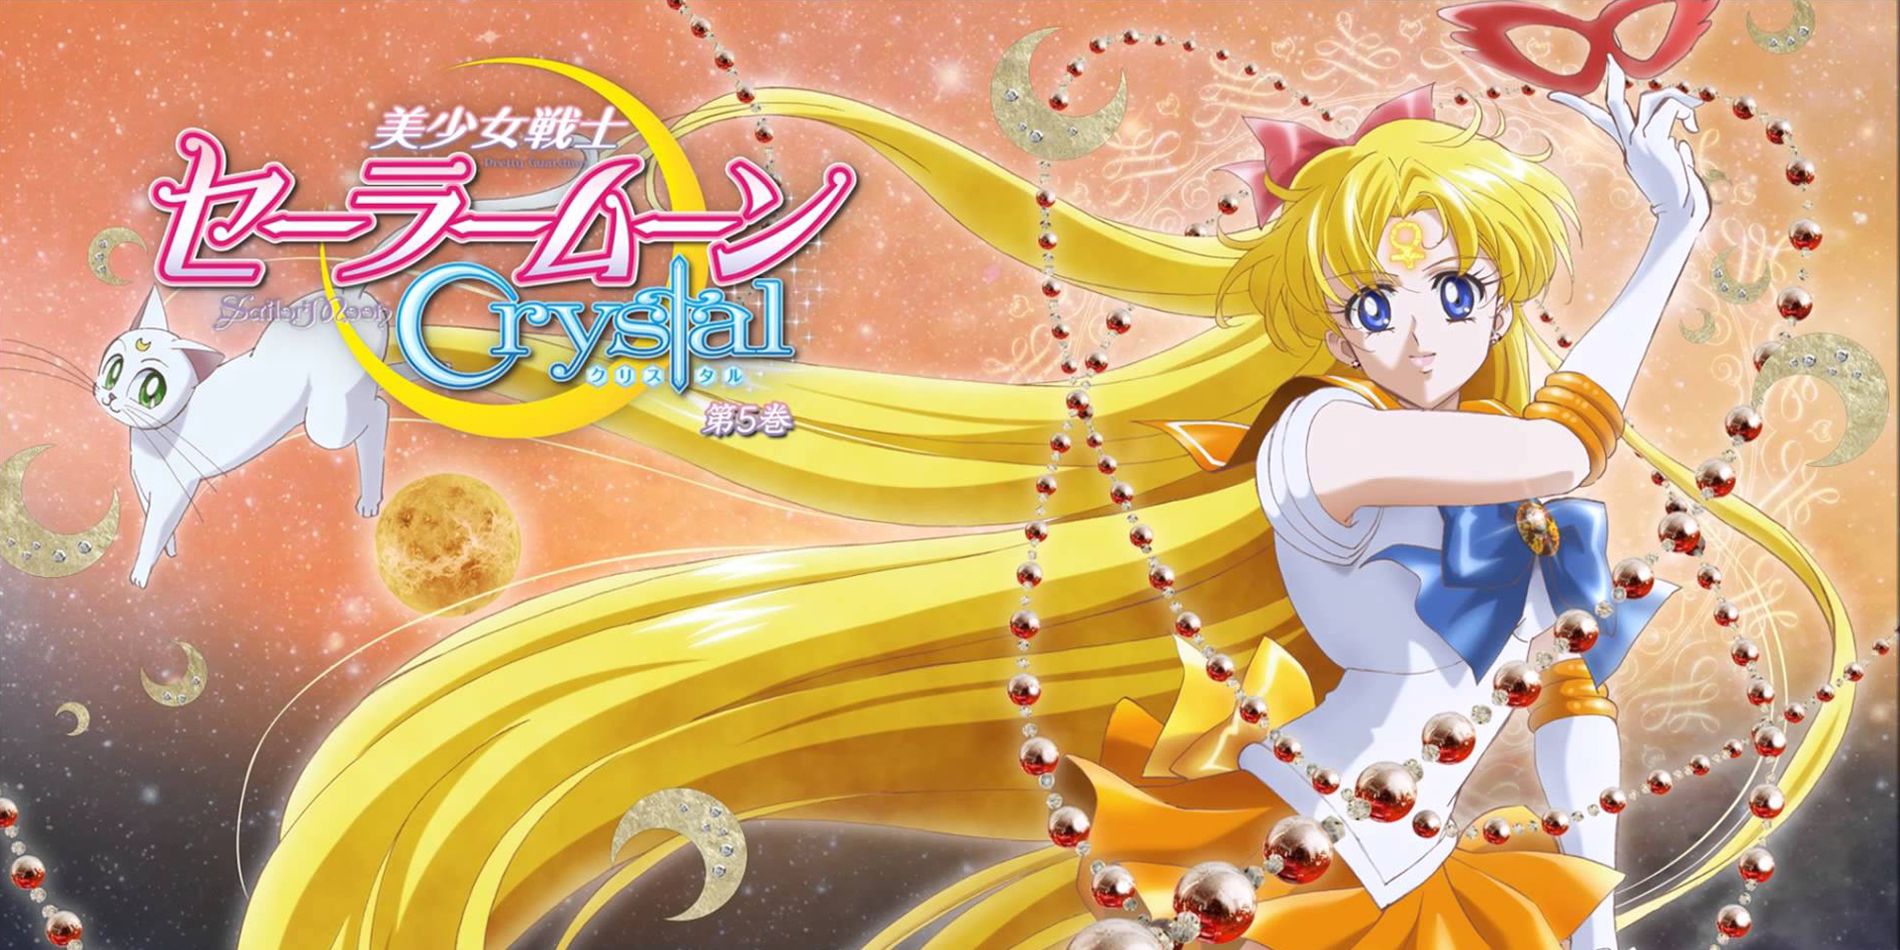 Sailor Venus from Sailor Moon Crystal with her metal chain